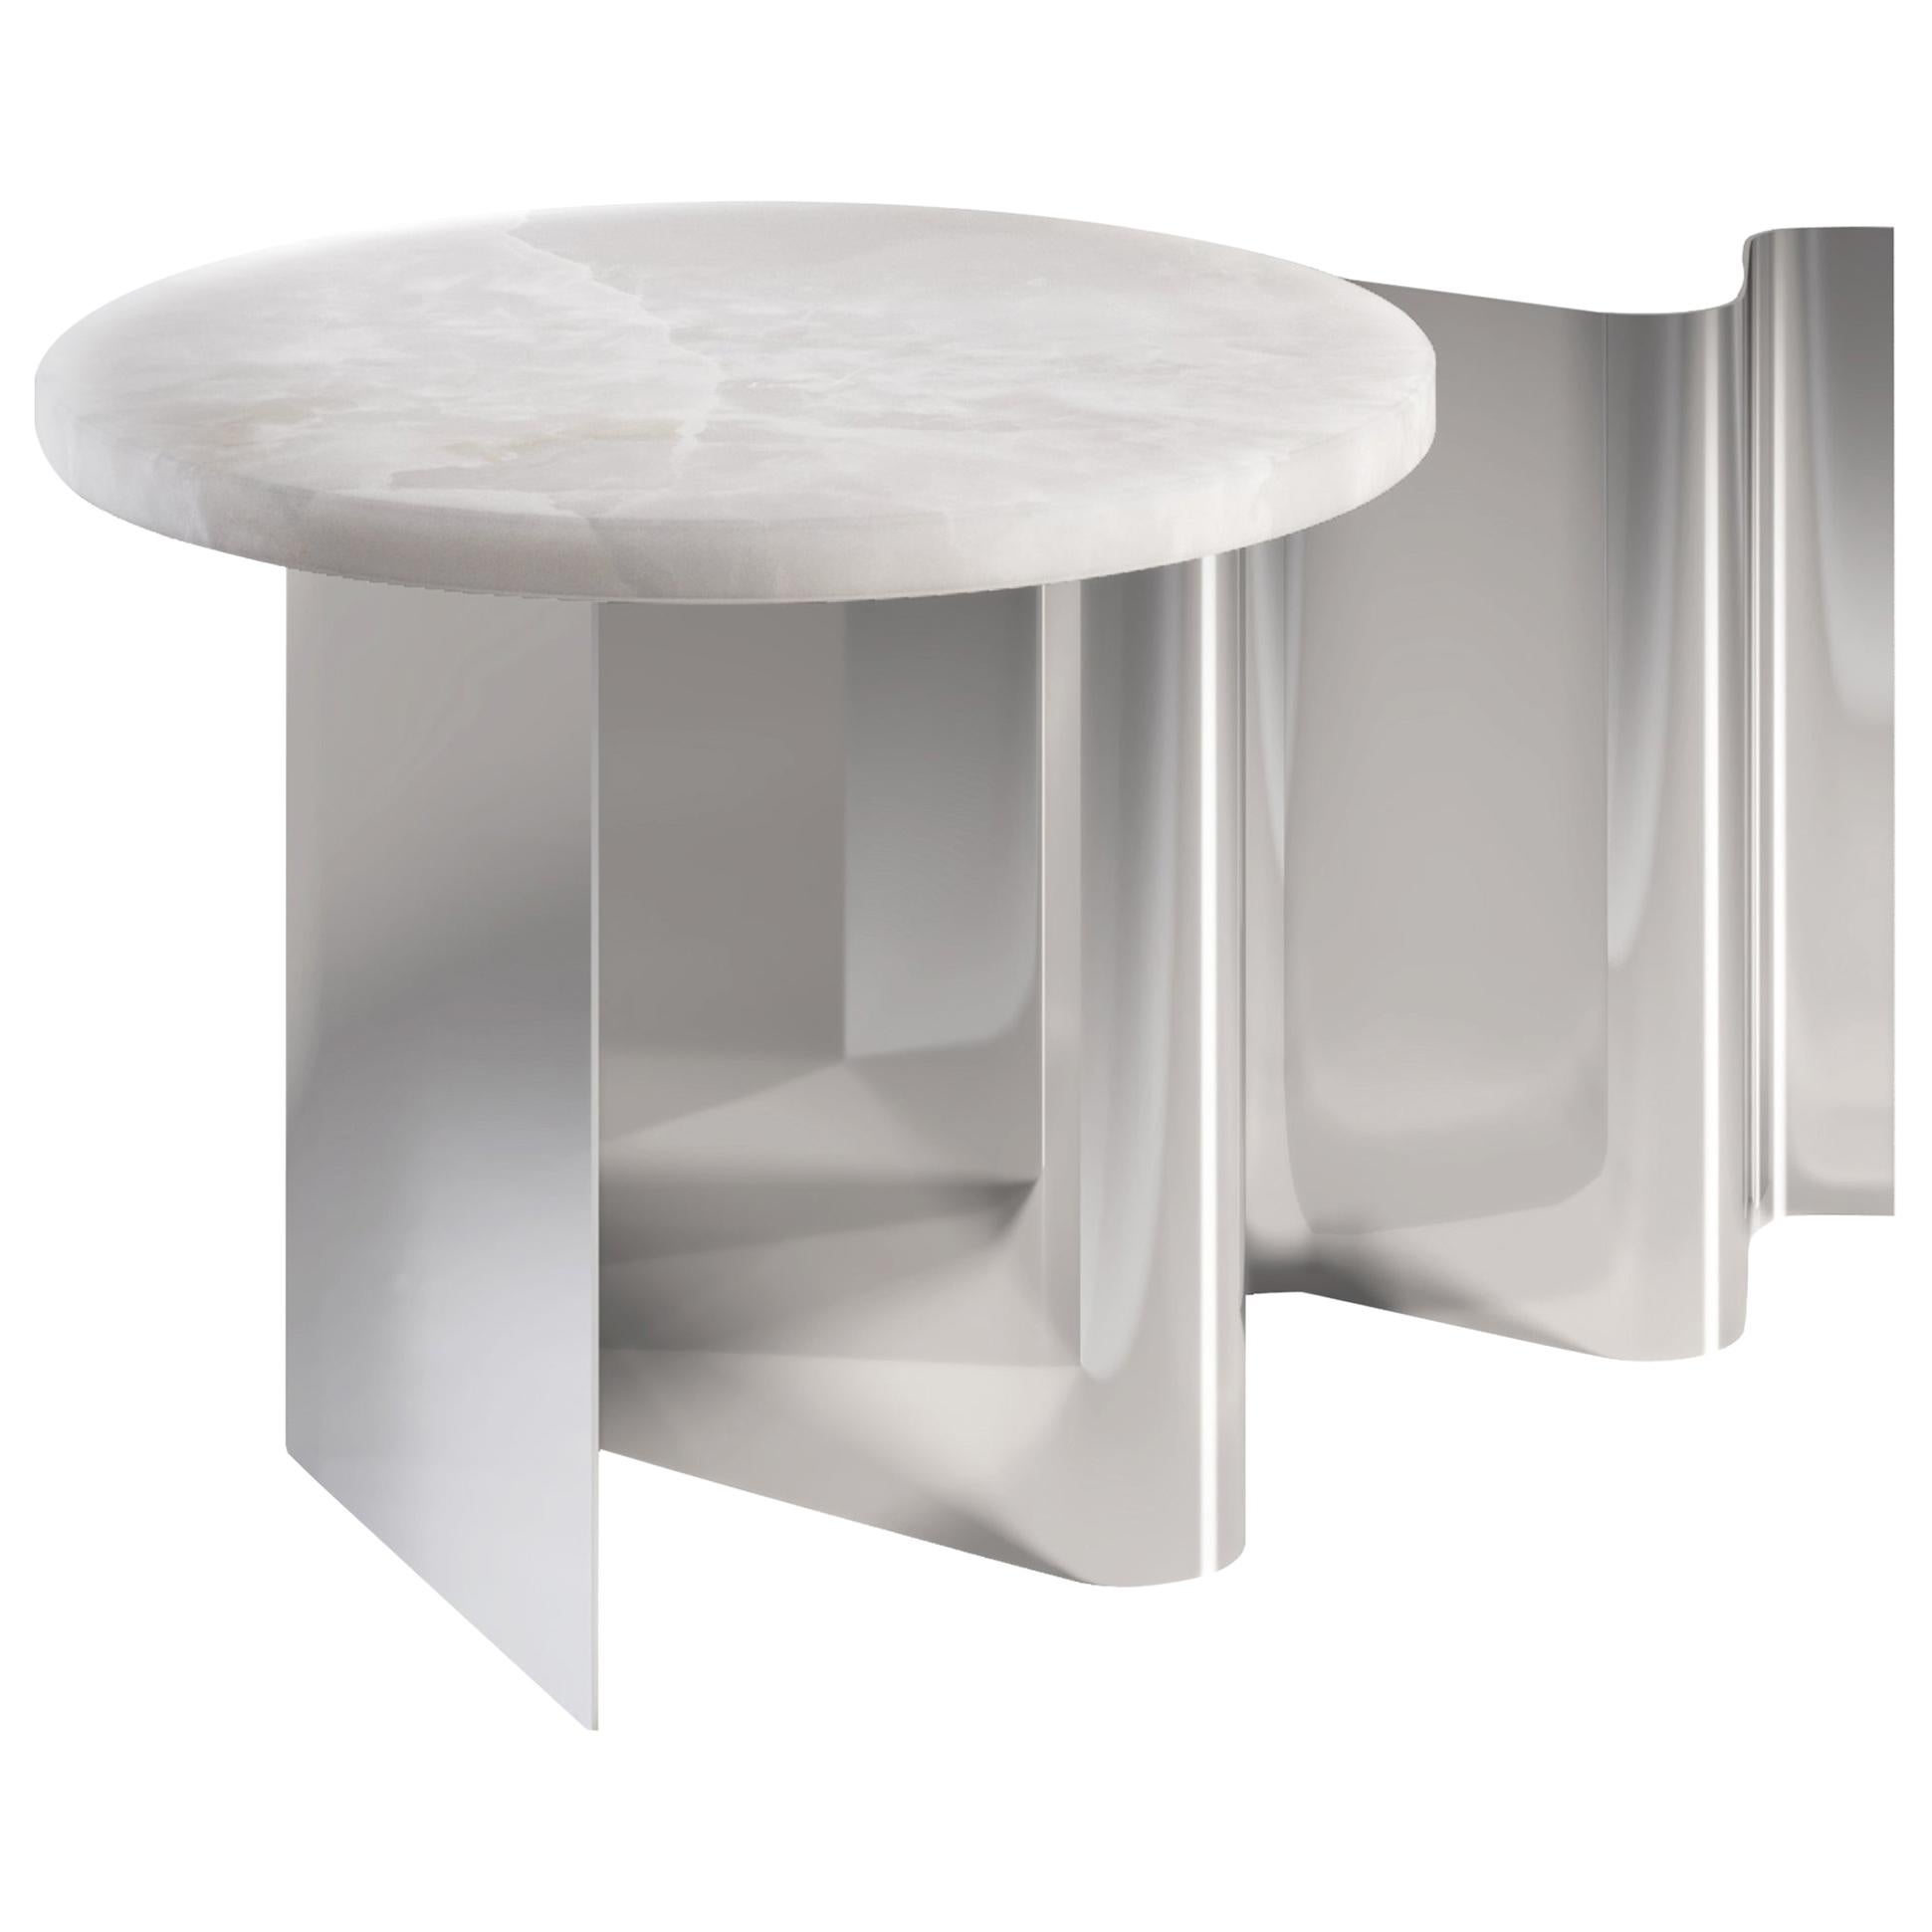 Sketch Contemporary Side Table in Metal and Marble by Artefatto Design Studio